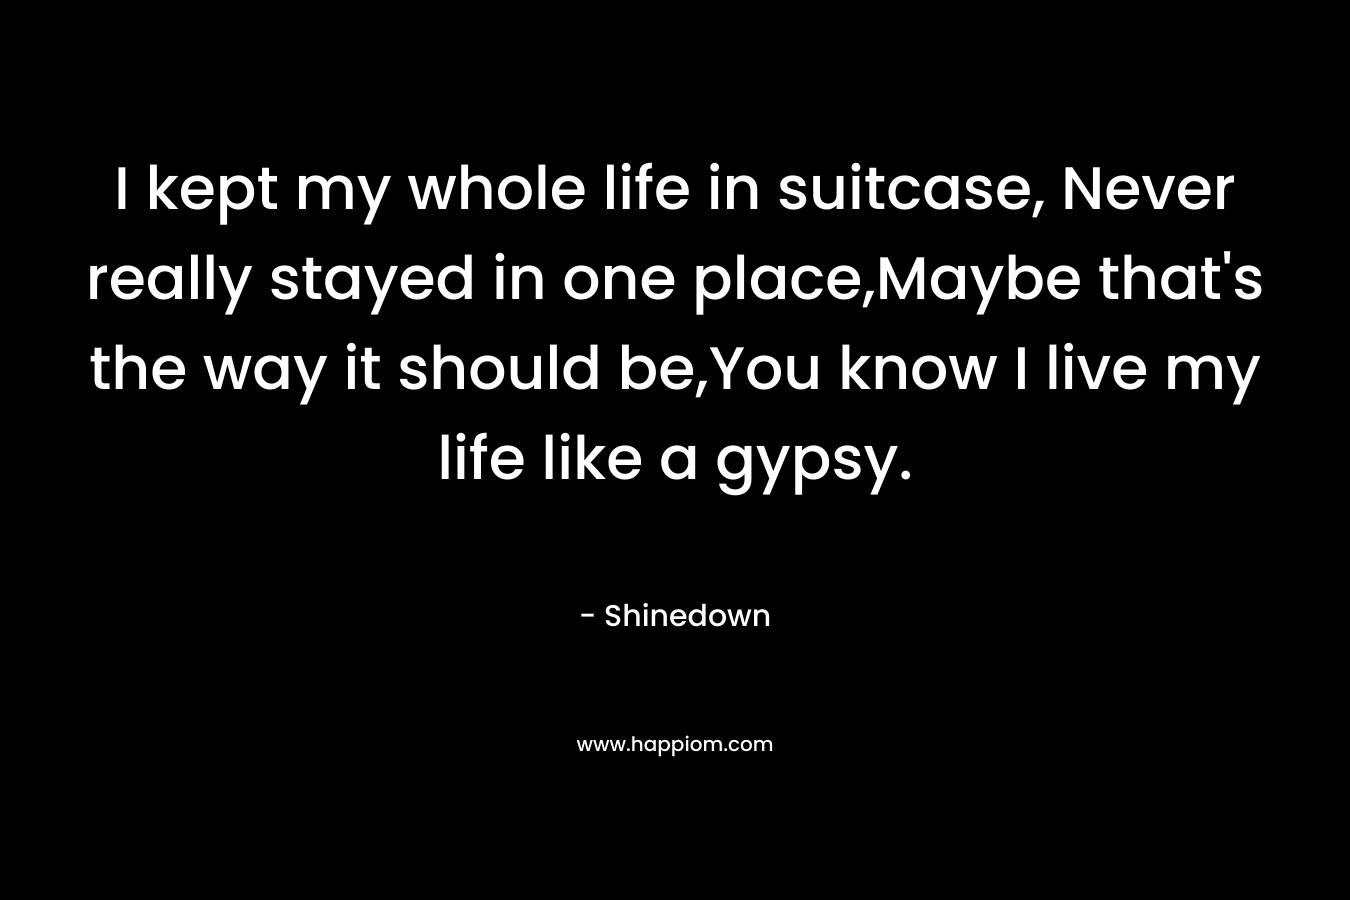 I kept my whole life in suitcase, Never really stayed in one place,Maybe that's the way it should be,You know I live my life like a gypsy.